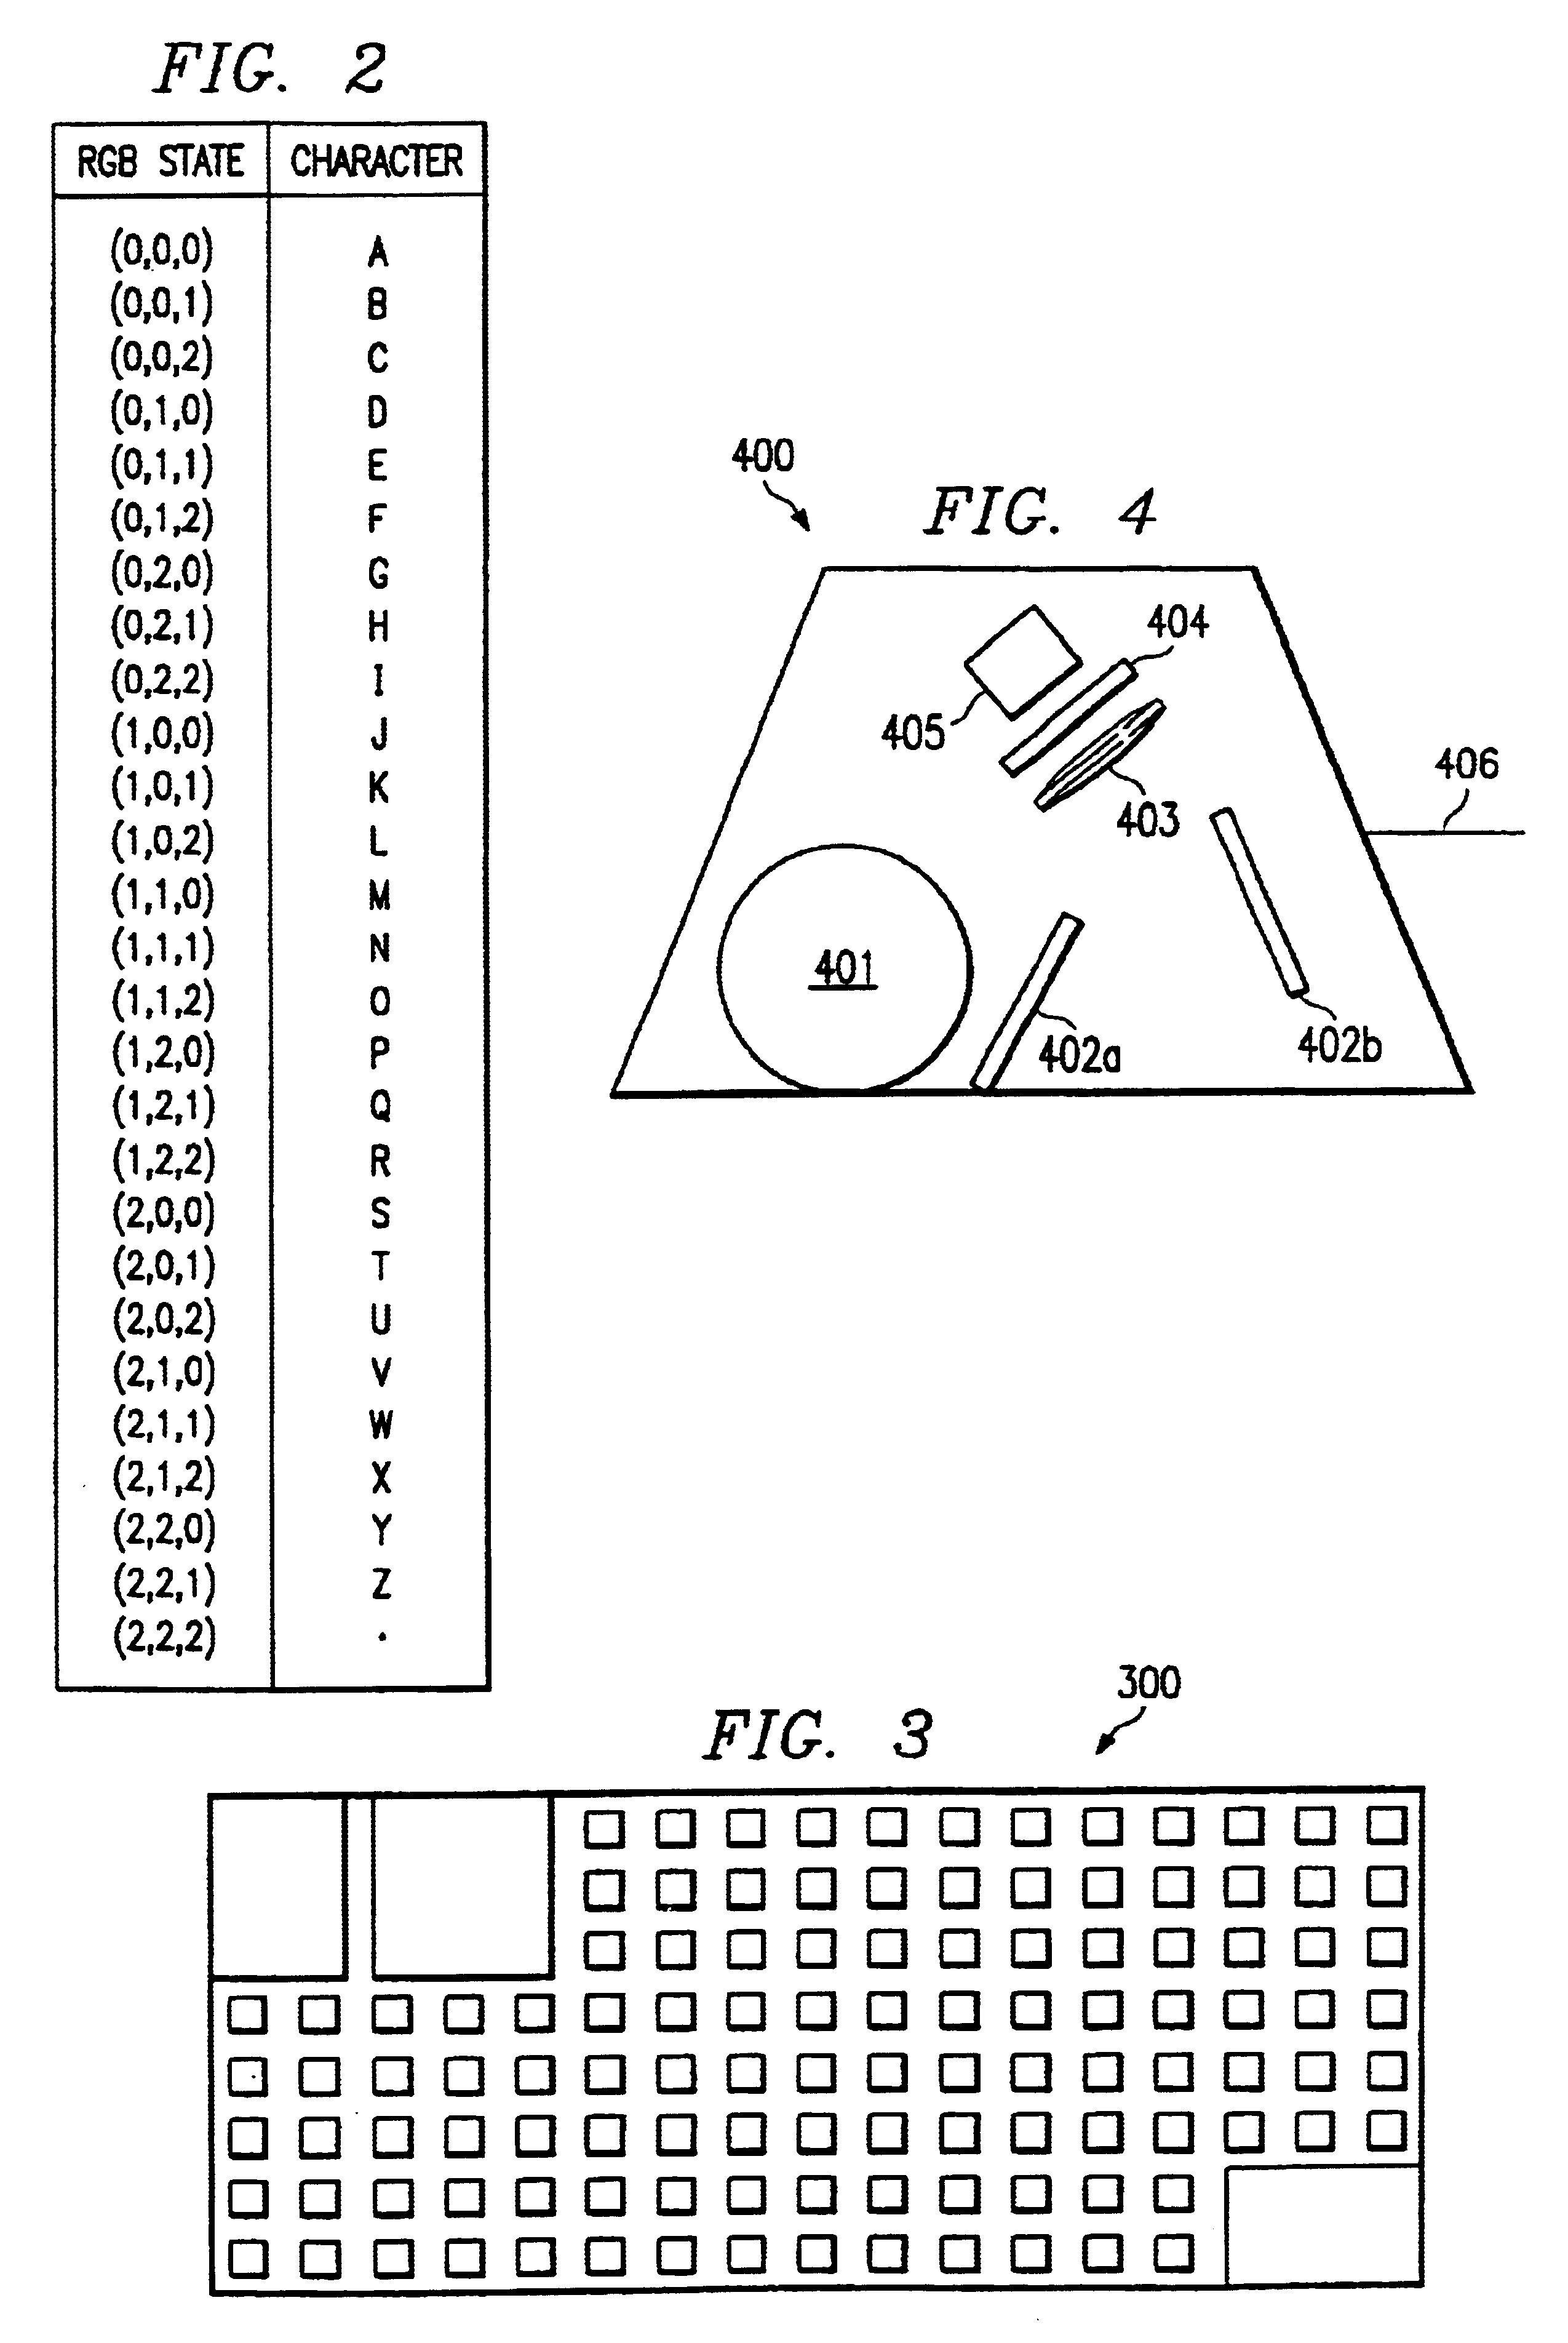 System and method for communication of character sets via supplemental or alternative visual stimuli